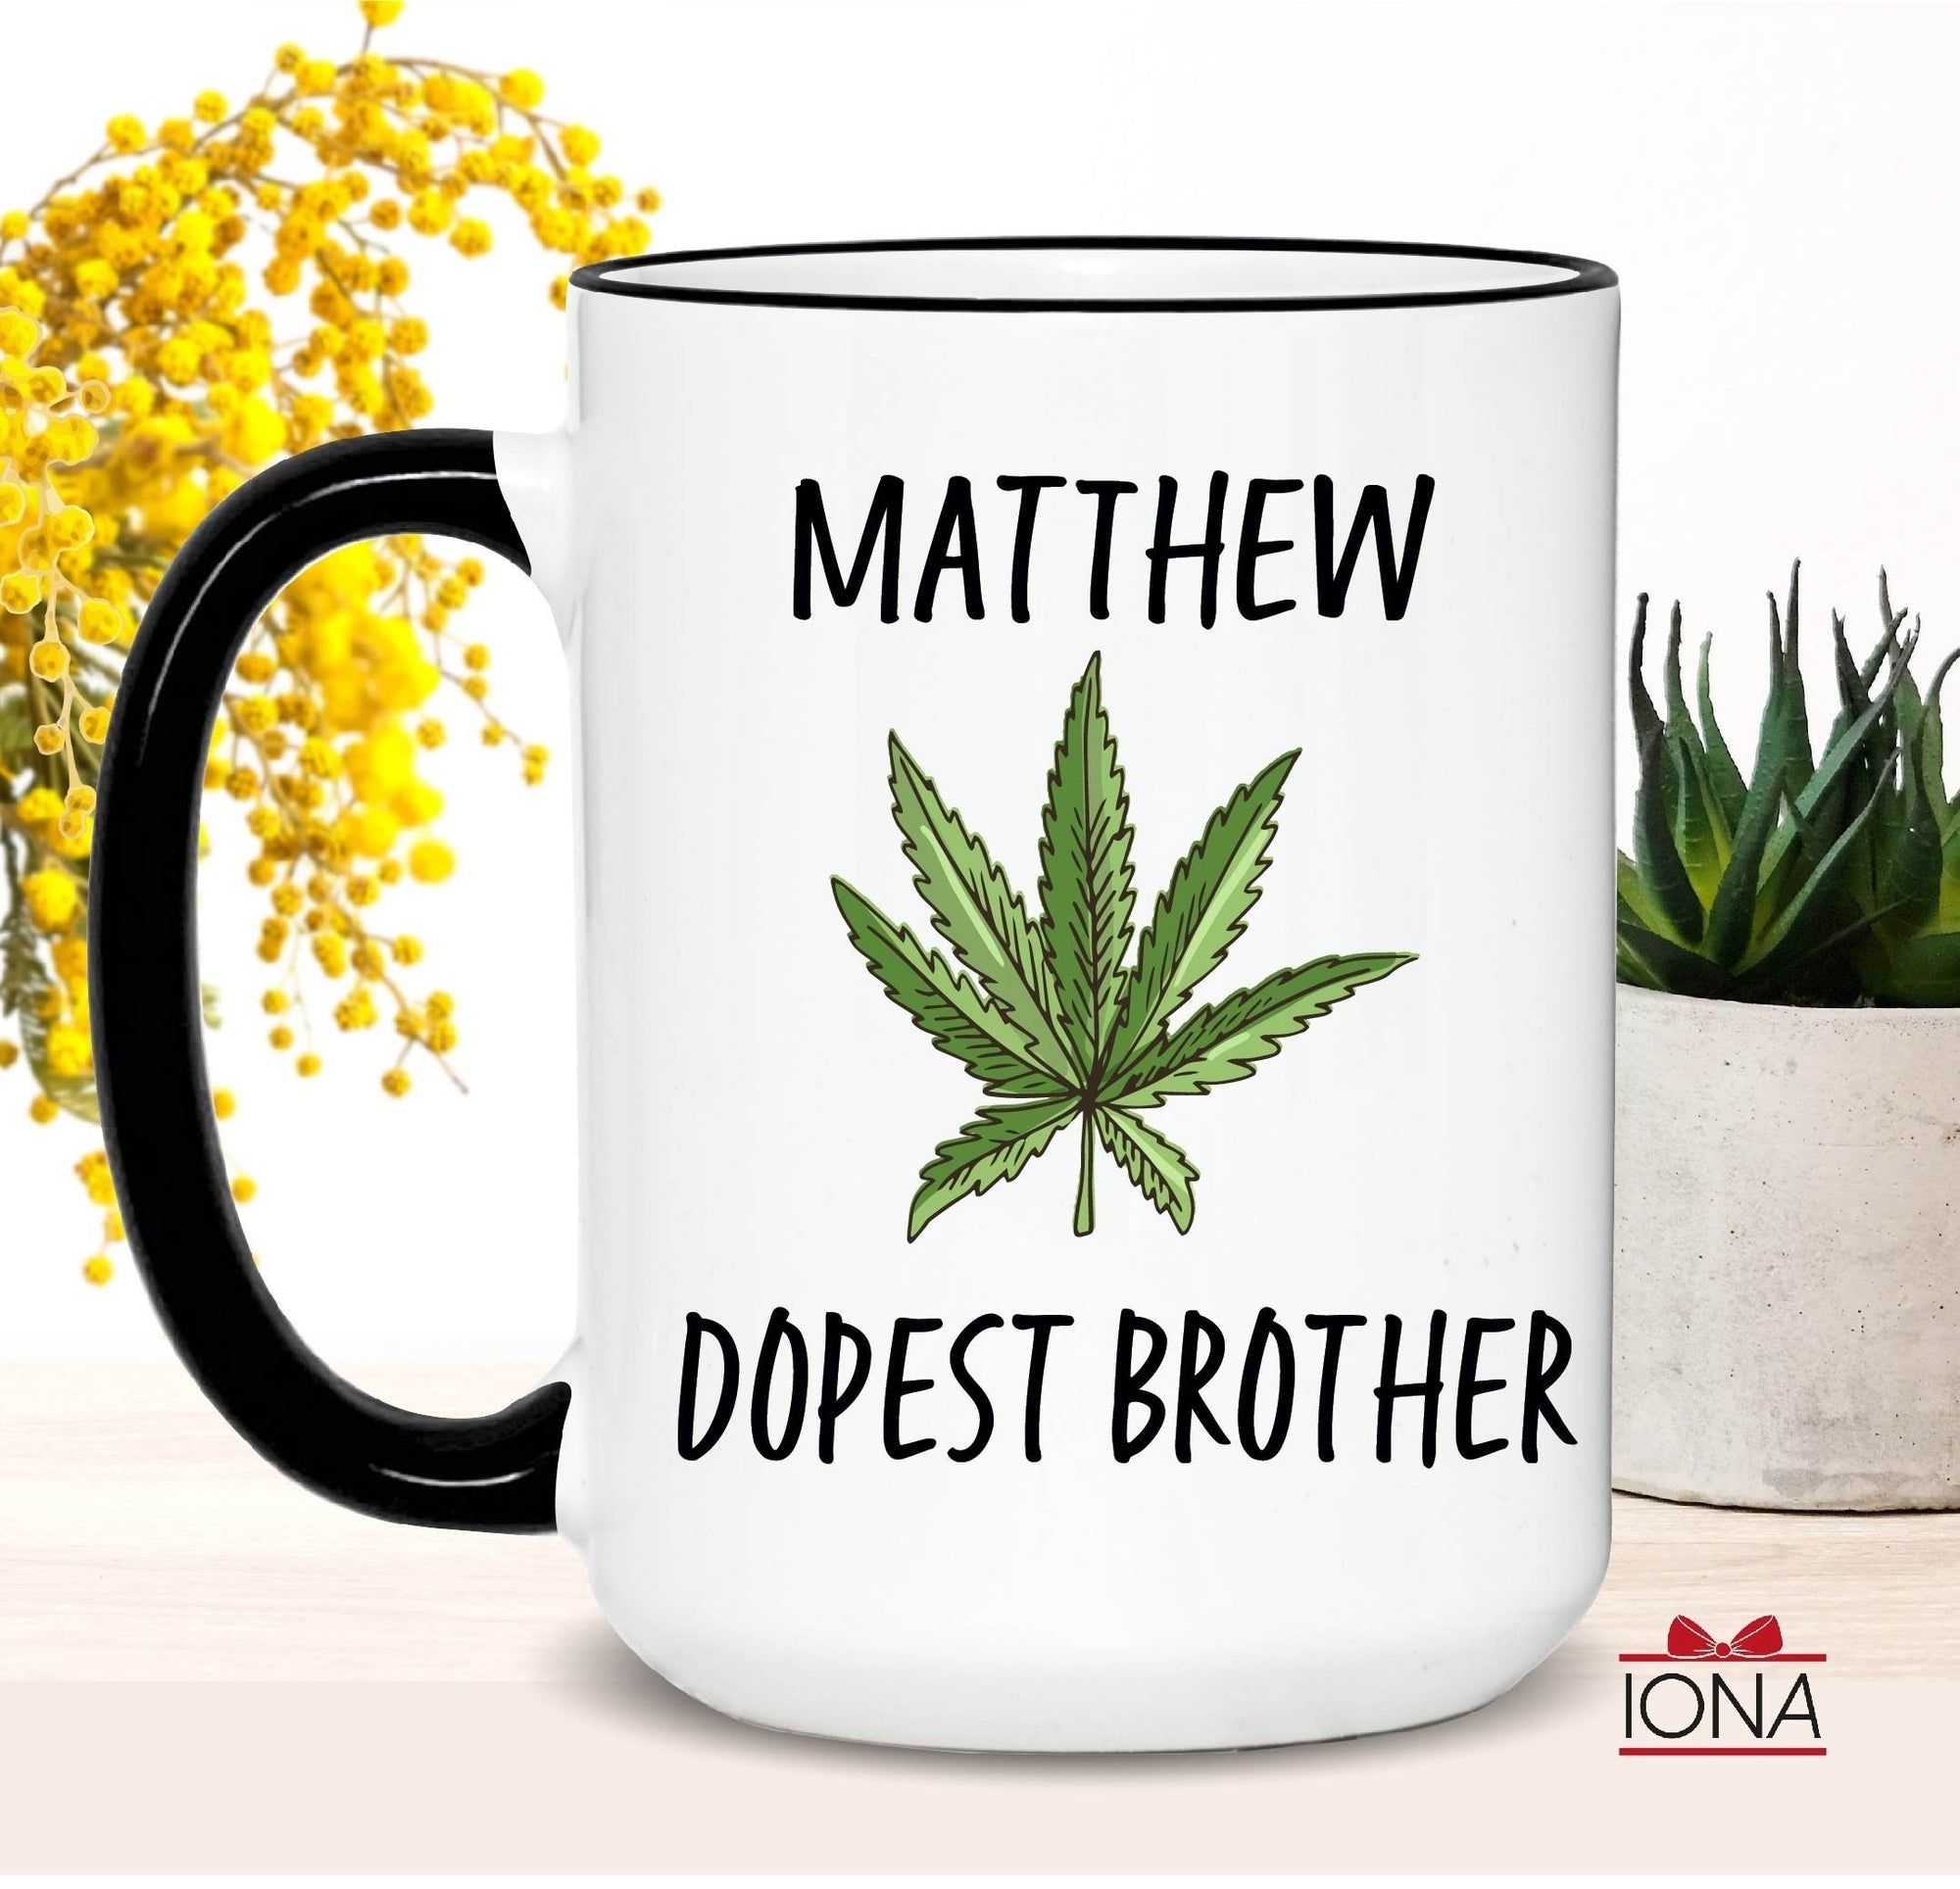 Dopest Brother Coffee Mug, Personalized Brother Birthday Gift, Funny Birthday Gift for Brother, Brother Mug, Best Fucking Brother Ever gift